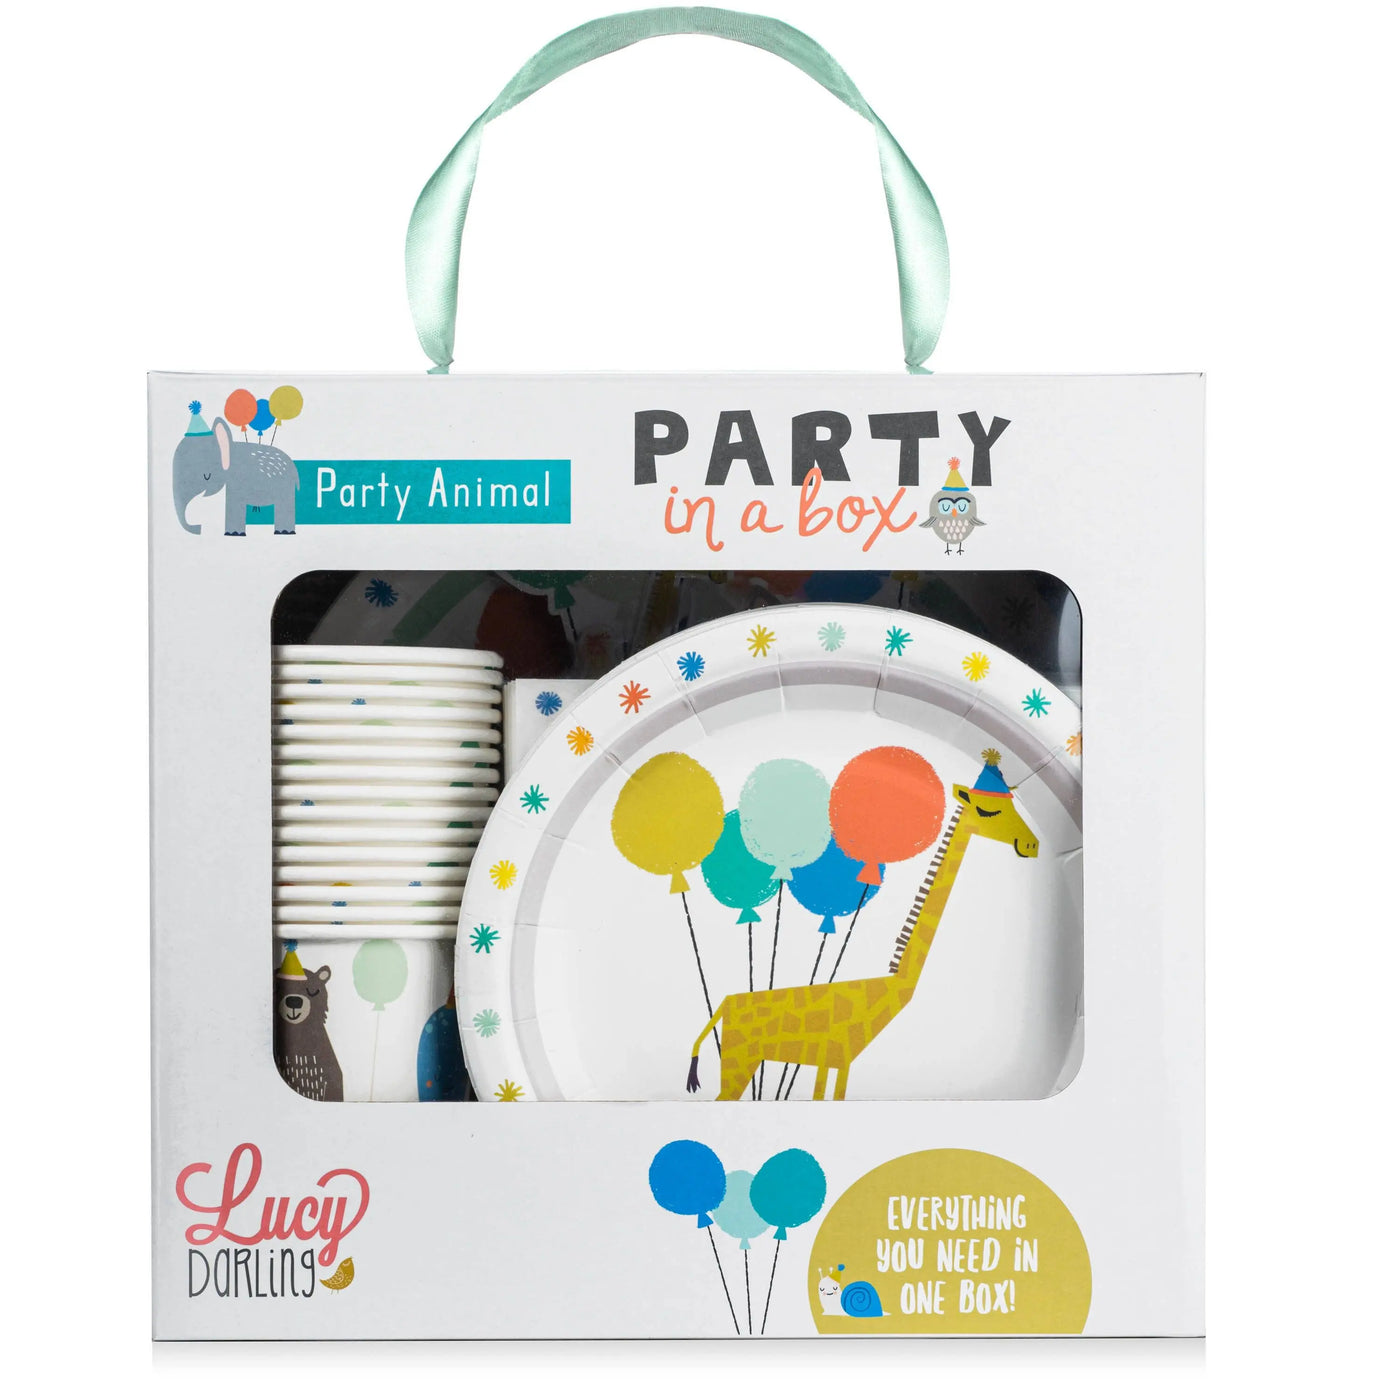 Party Animal Party in a Box! Lucy Darling